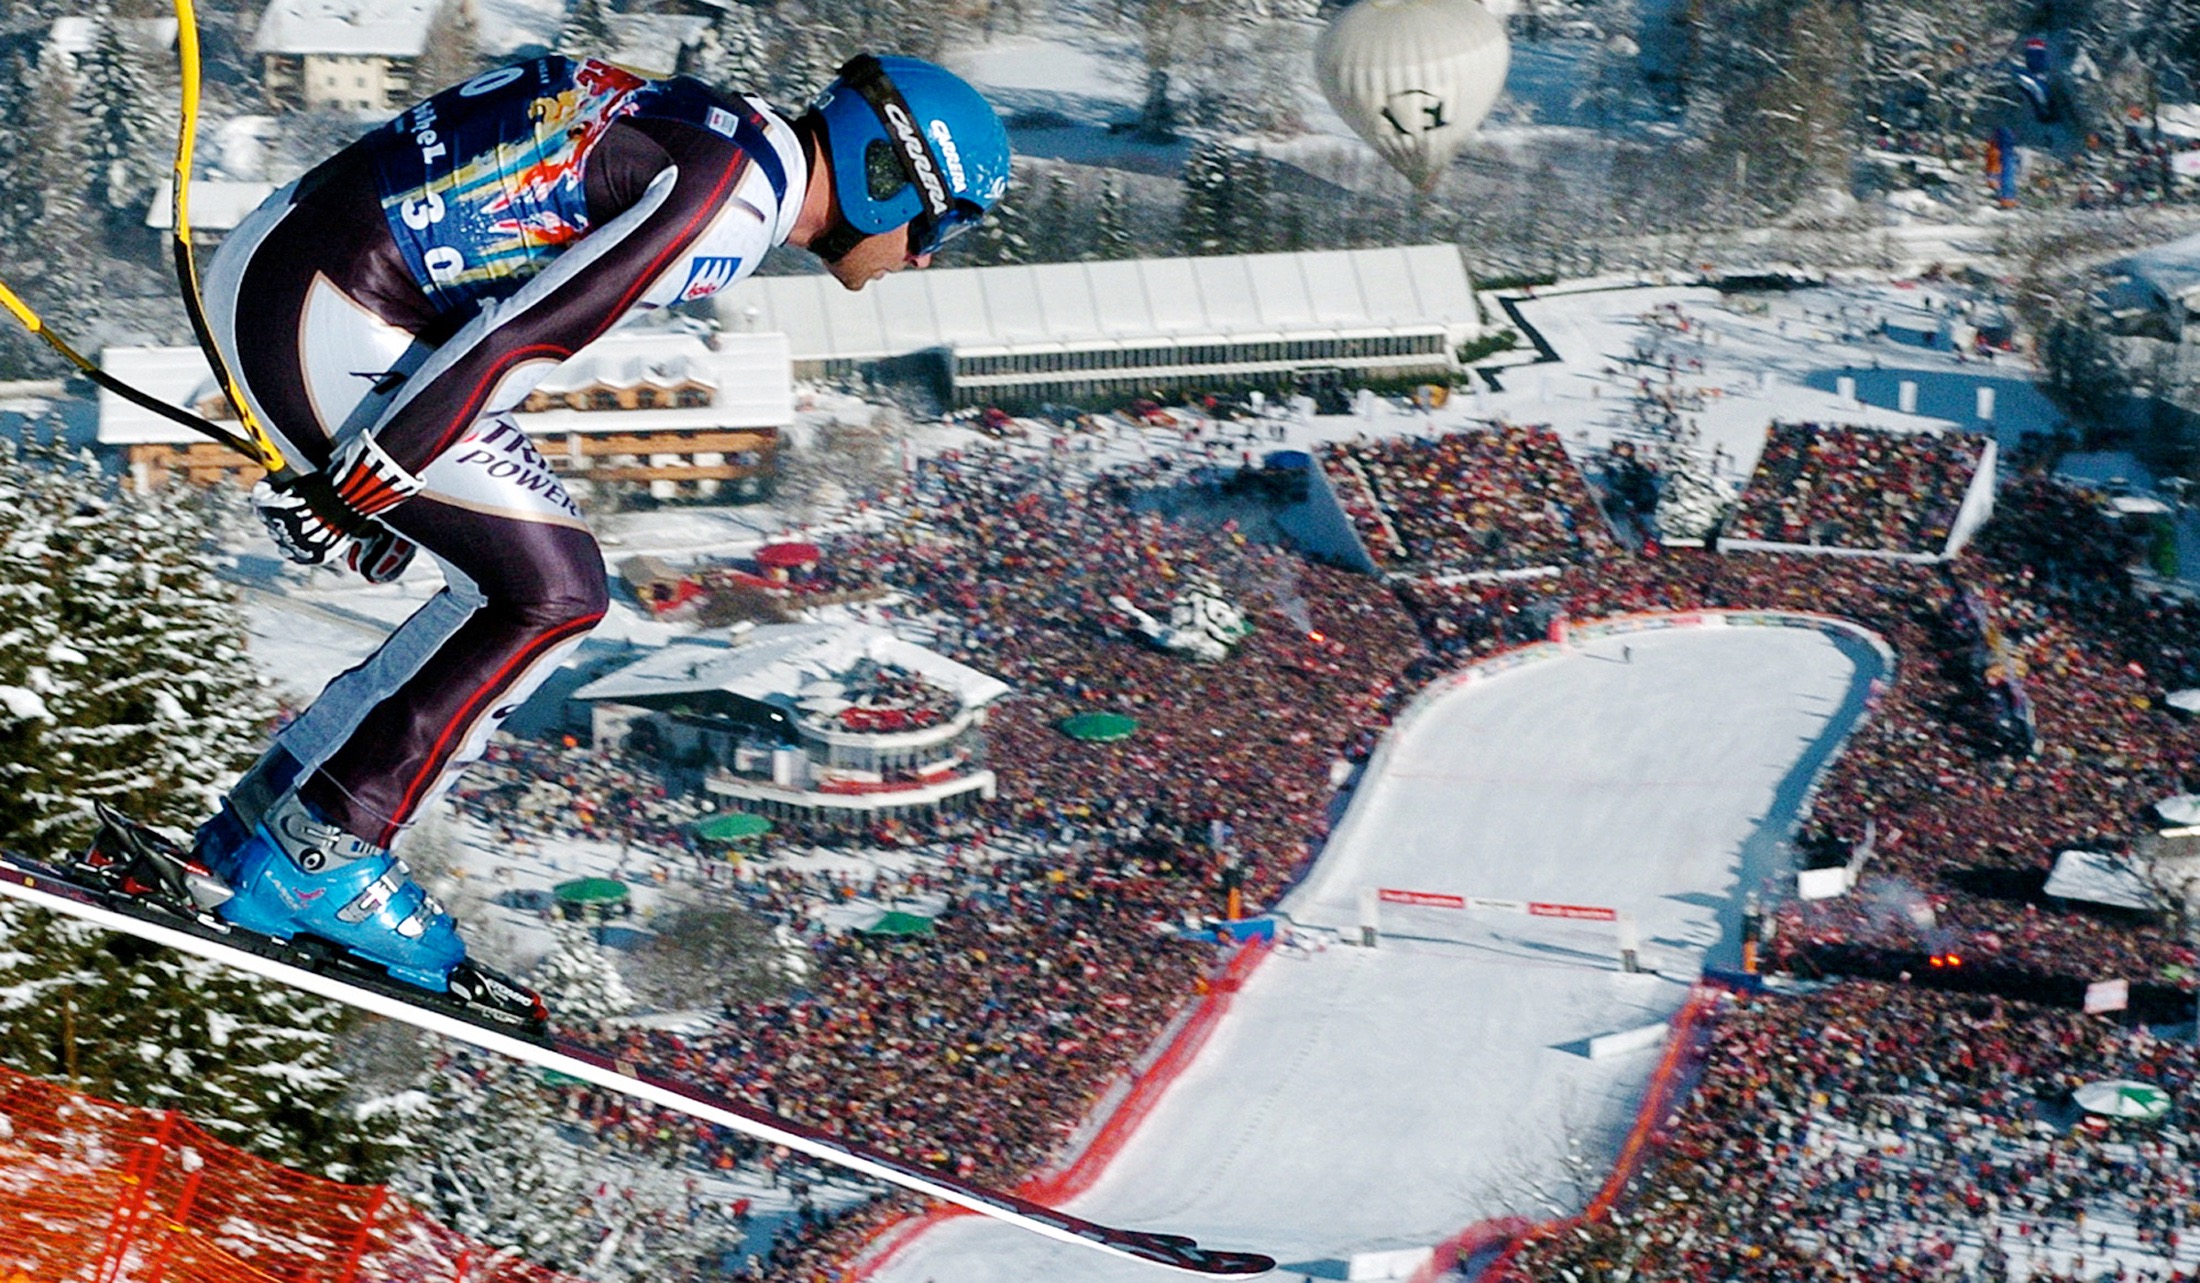 Stephan Eberharter, one of the most successful ski racers in history…in action